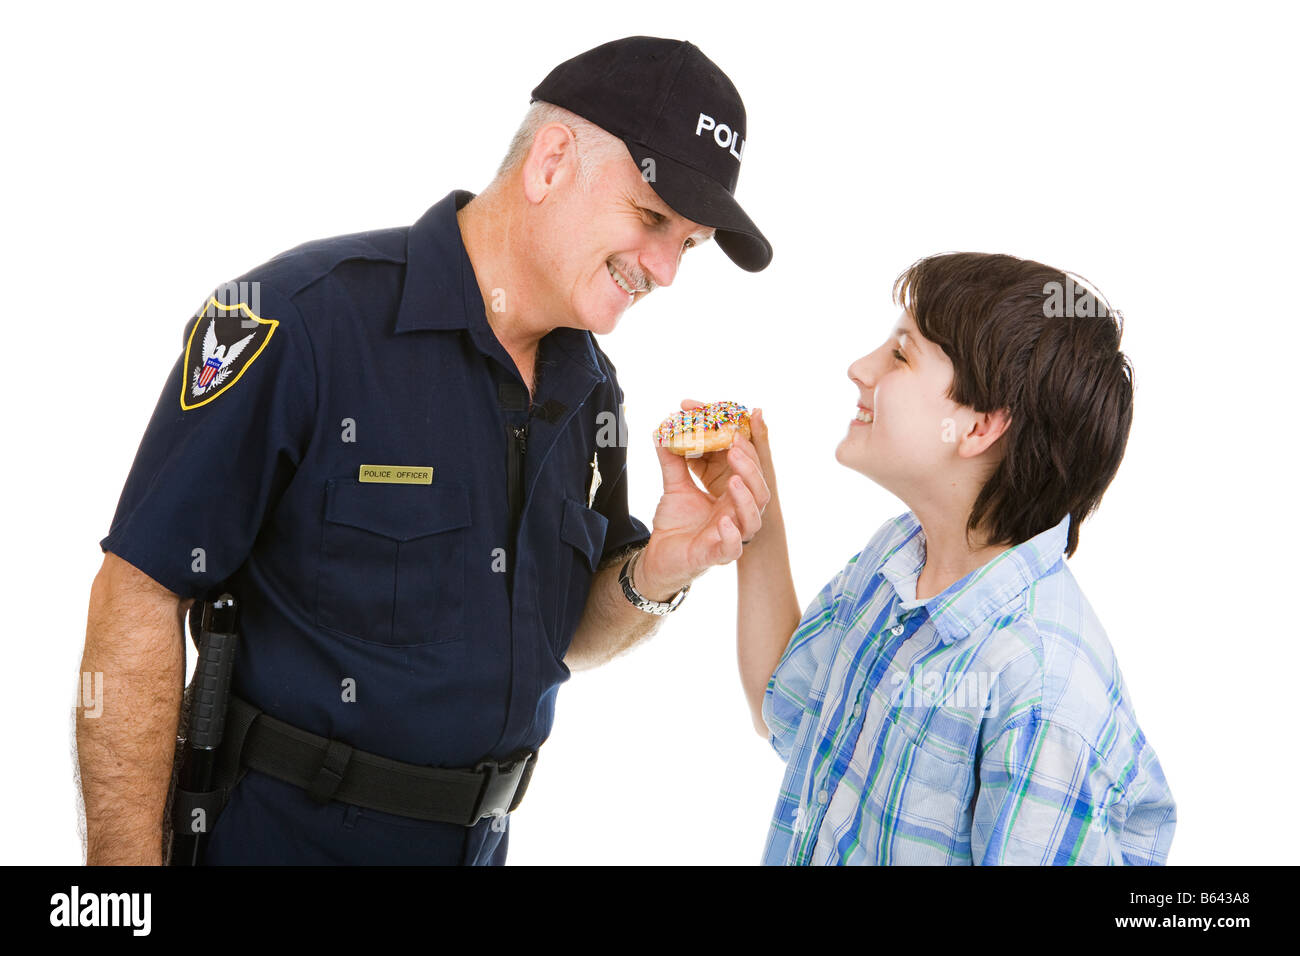 Adolescent boy giving a donut to a friendly police officer Isolated on white Stock Photo